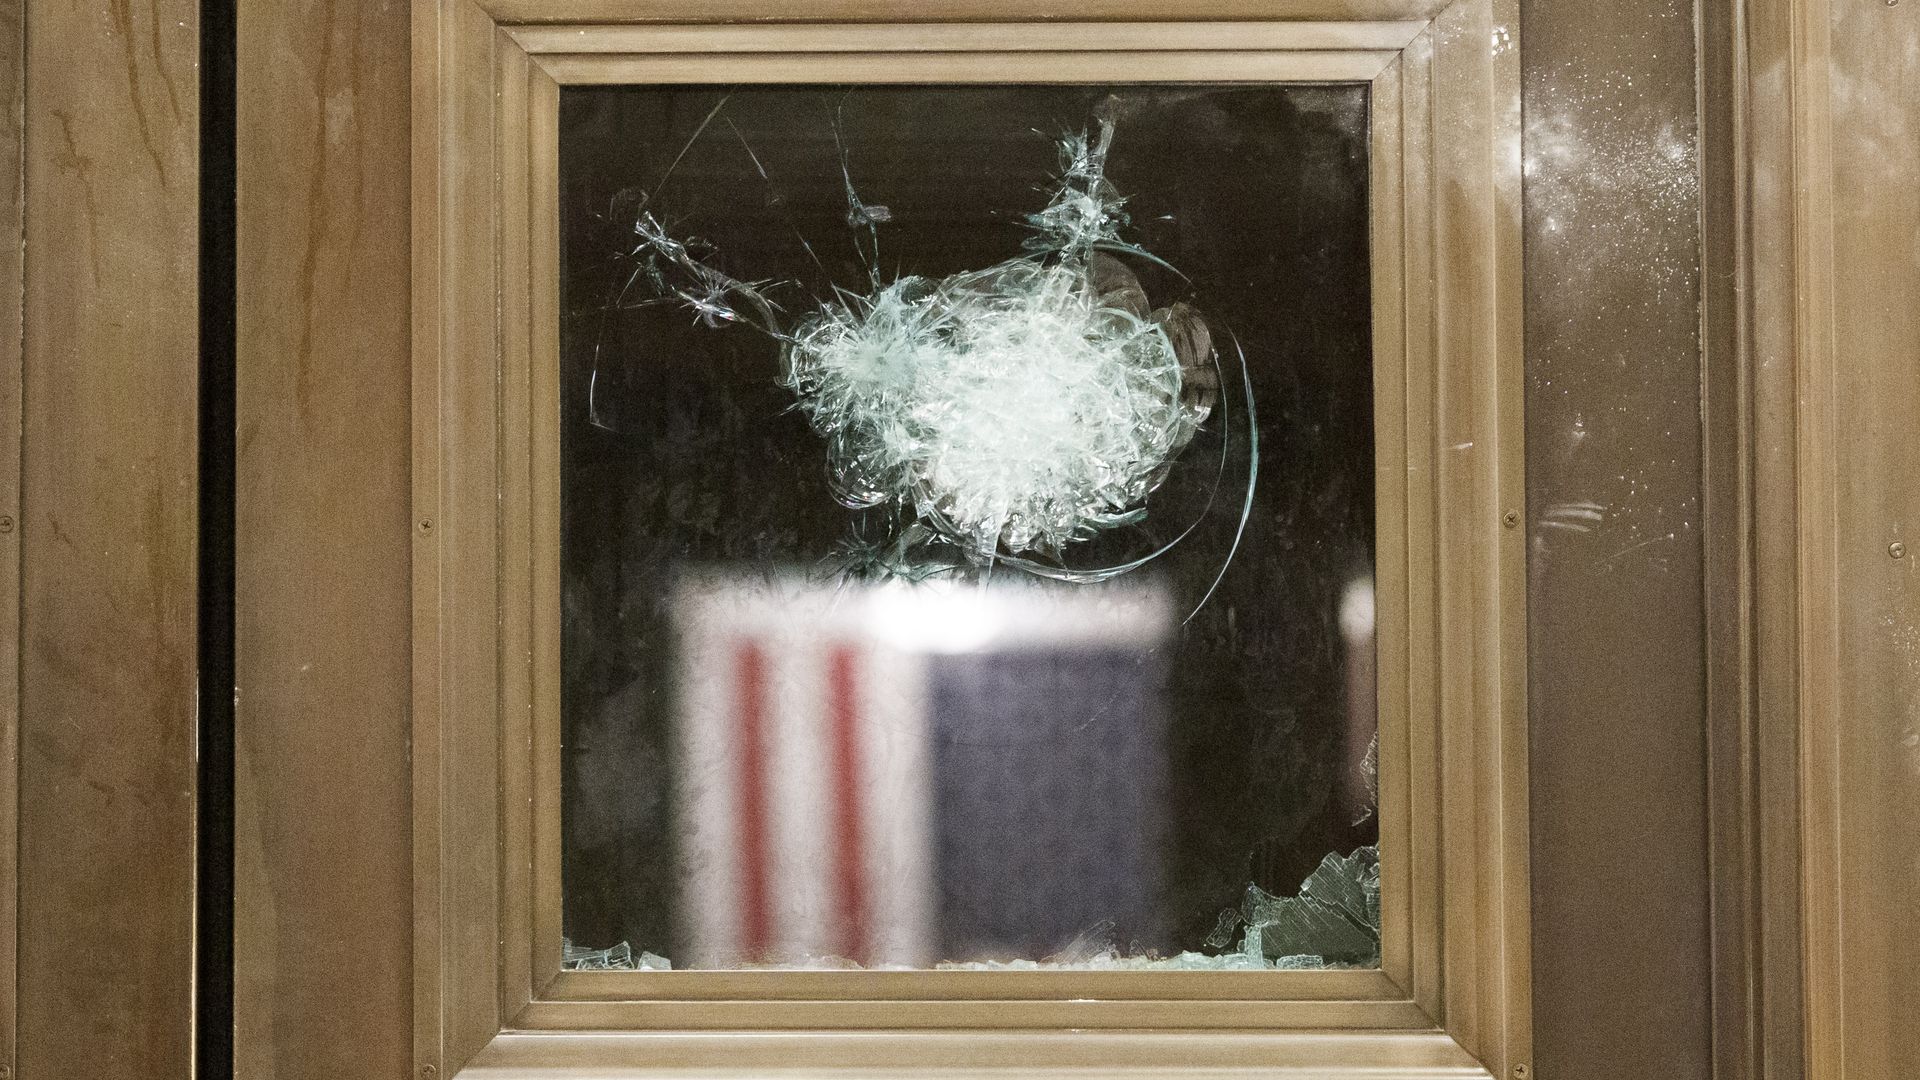 Photo of a cracked glass window looking into a room with the American flag hanging from the wall